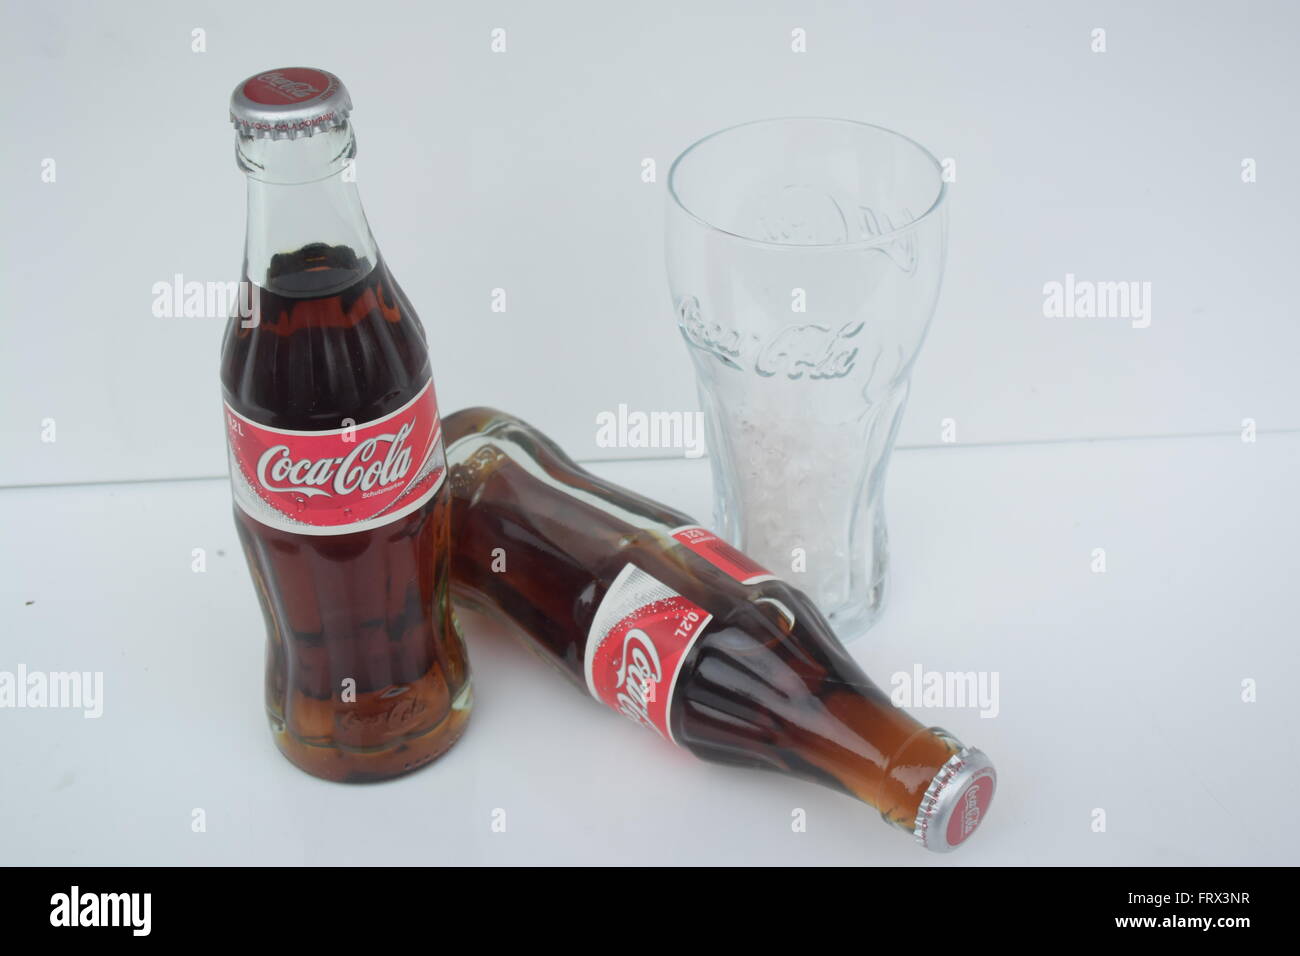 Coca-Cola Recycled Glass Bottle W/Lid 20oz.